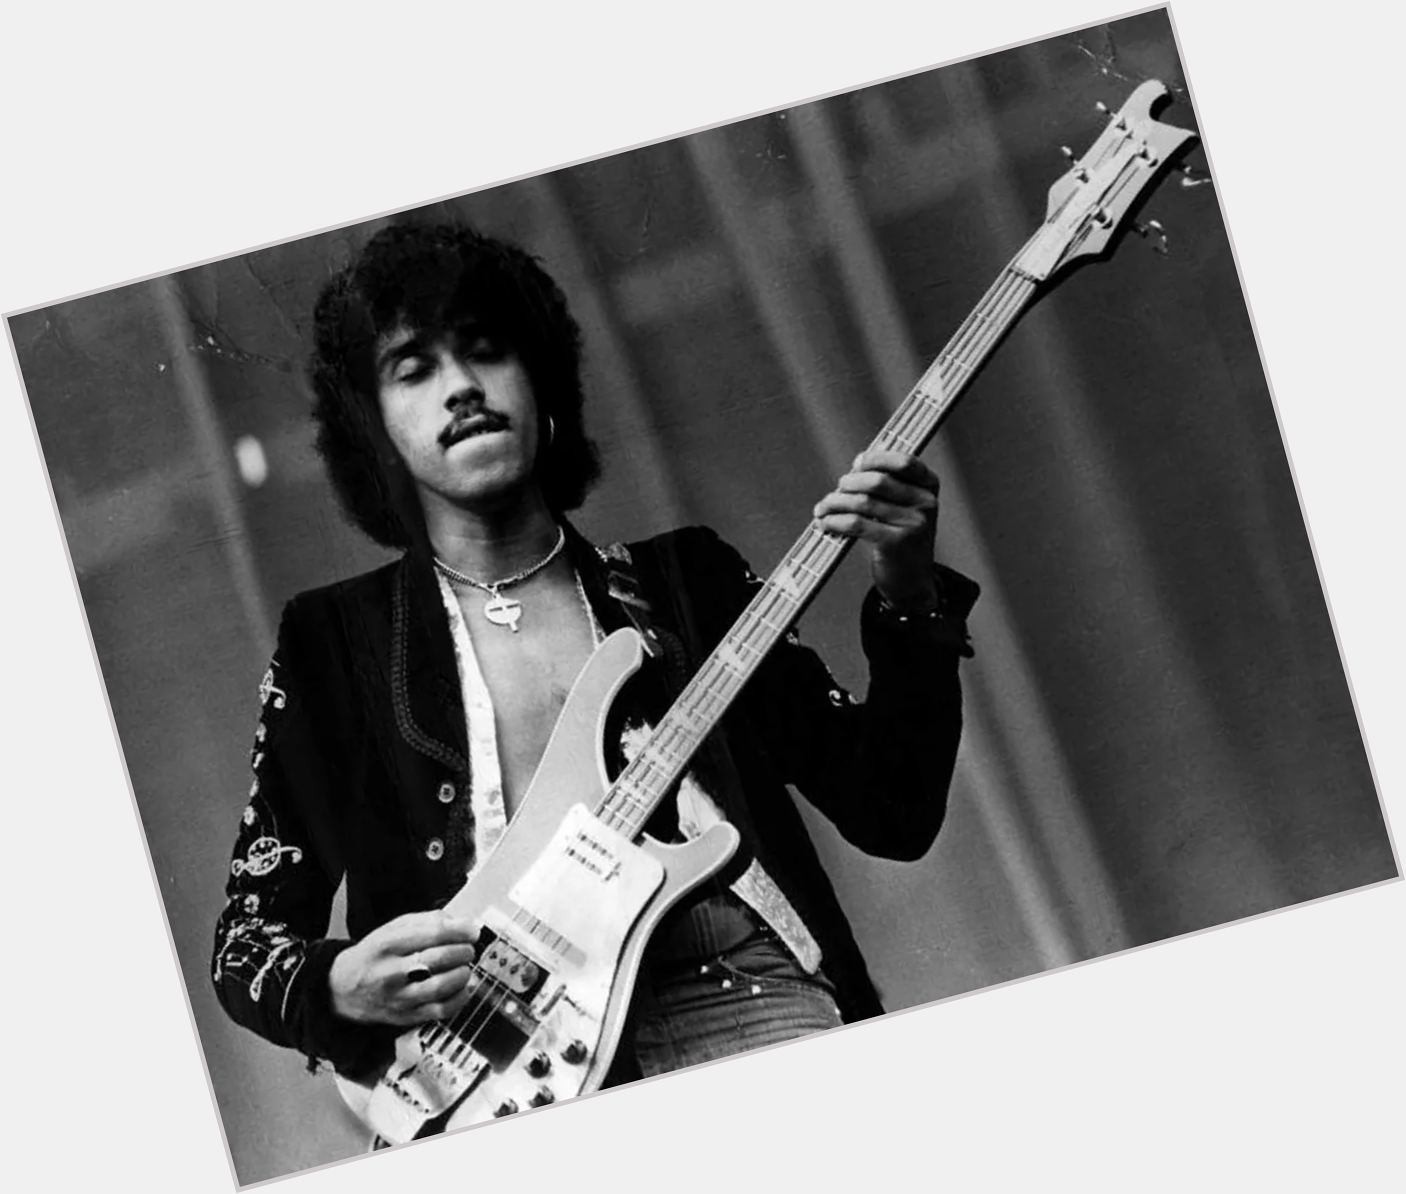 Happy Birthday Phil Lynott ! We still miss you! One of the all time great rockers. 